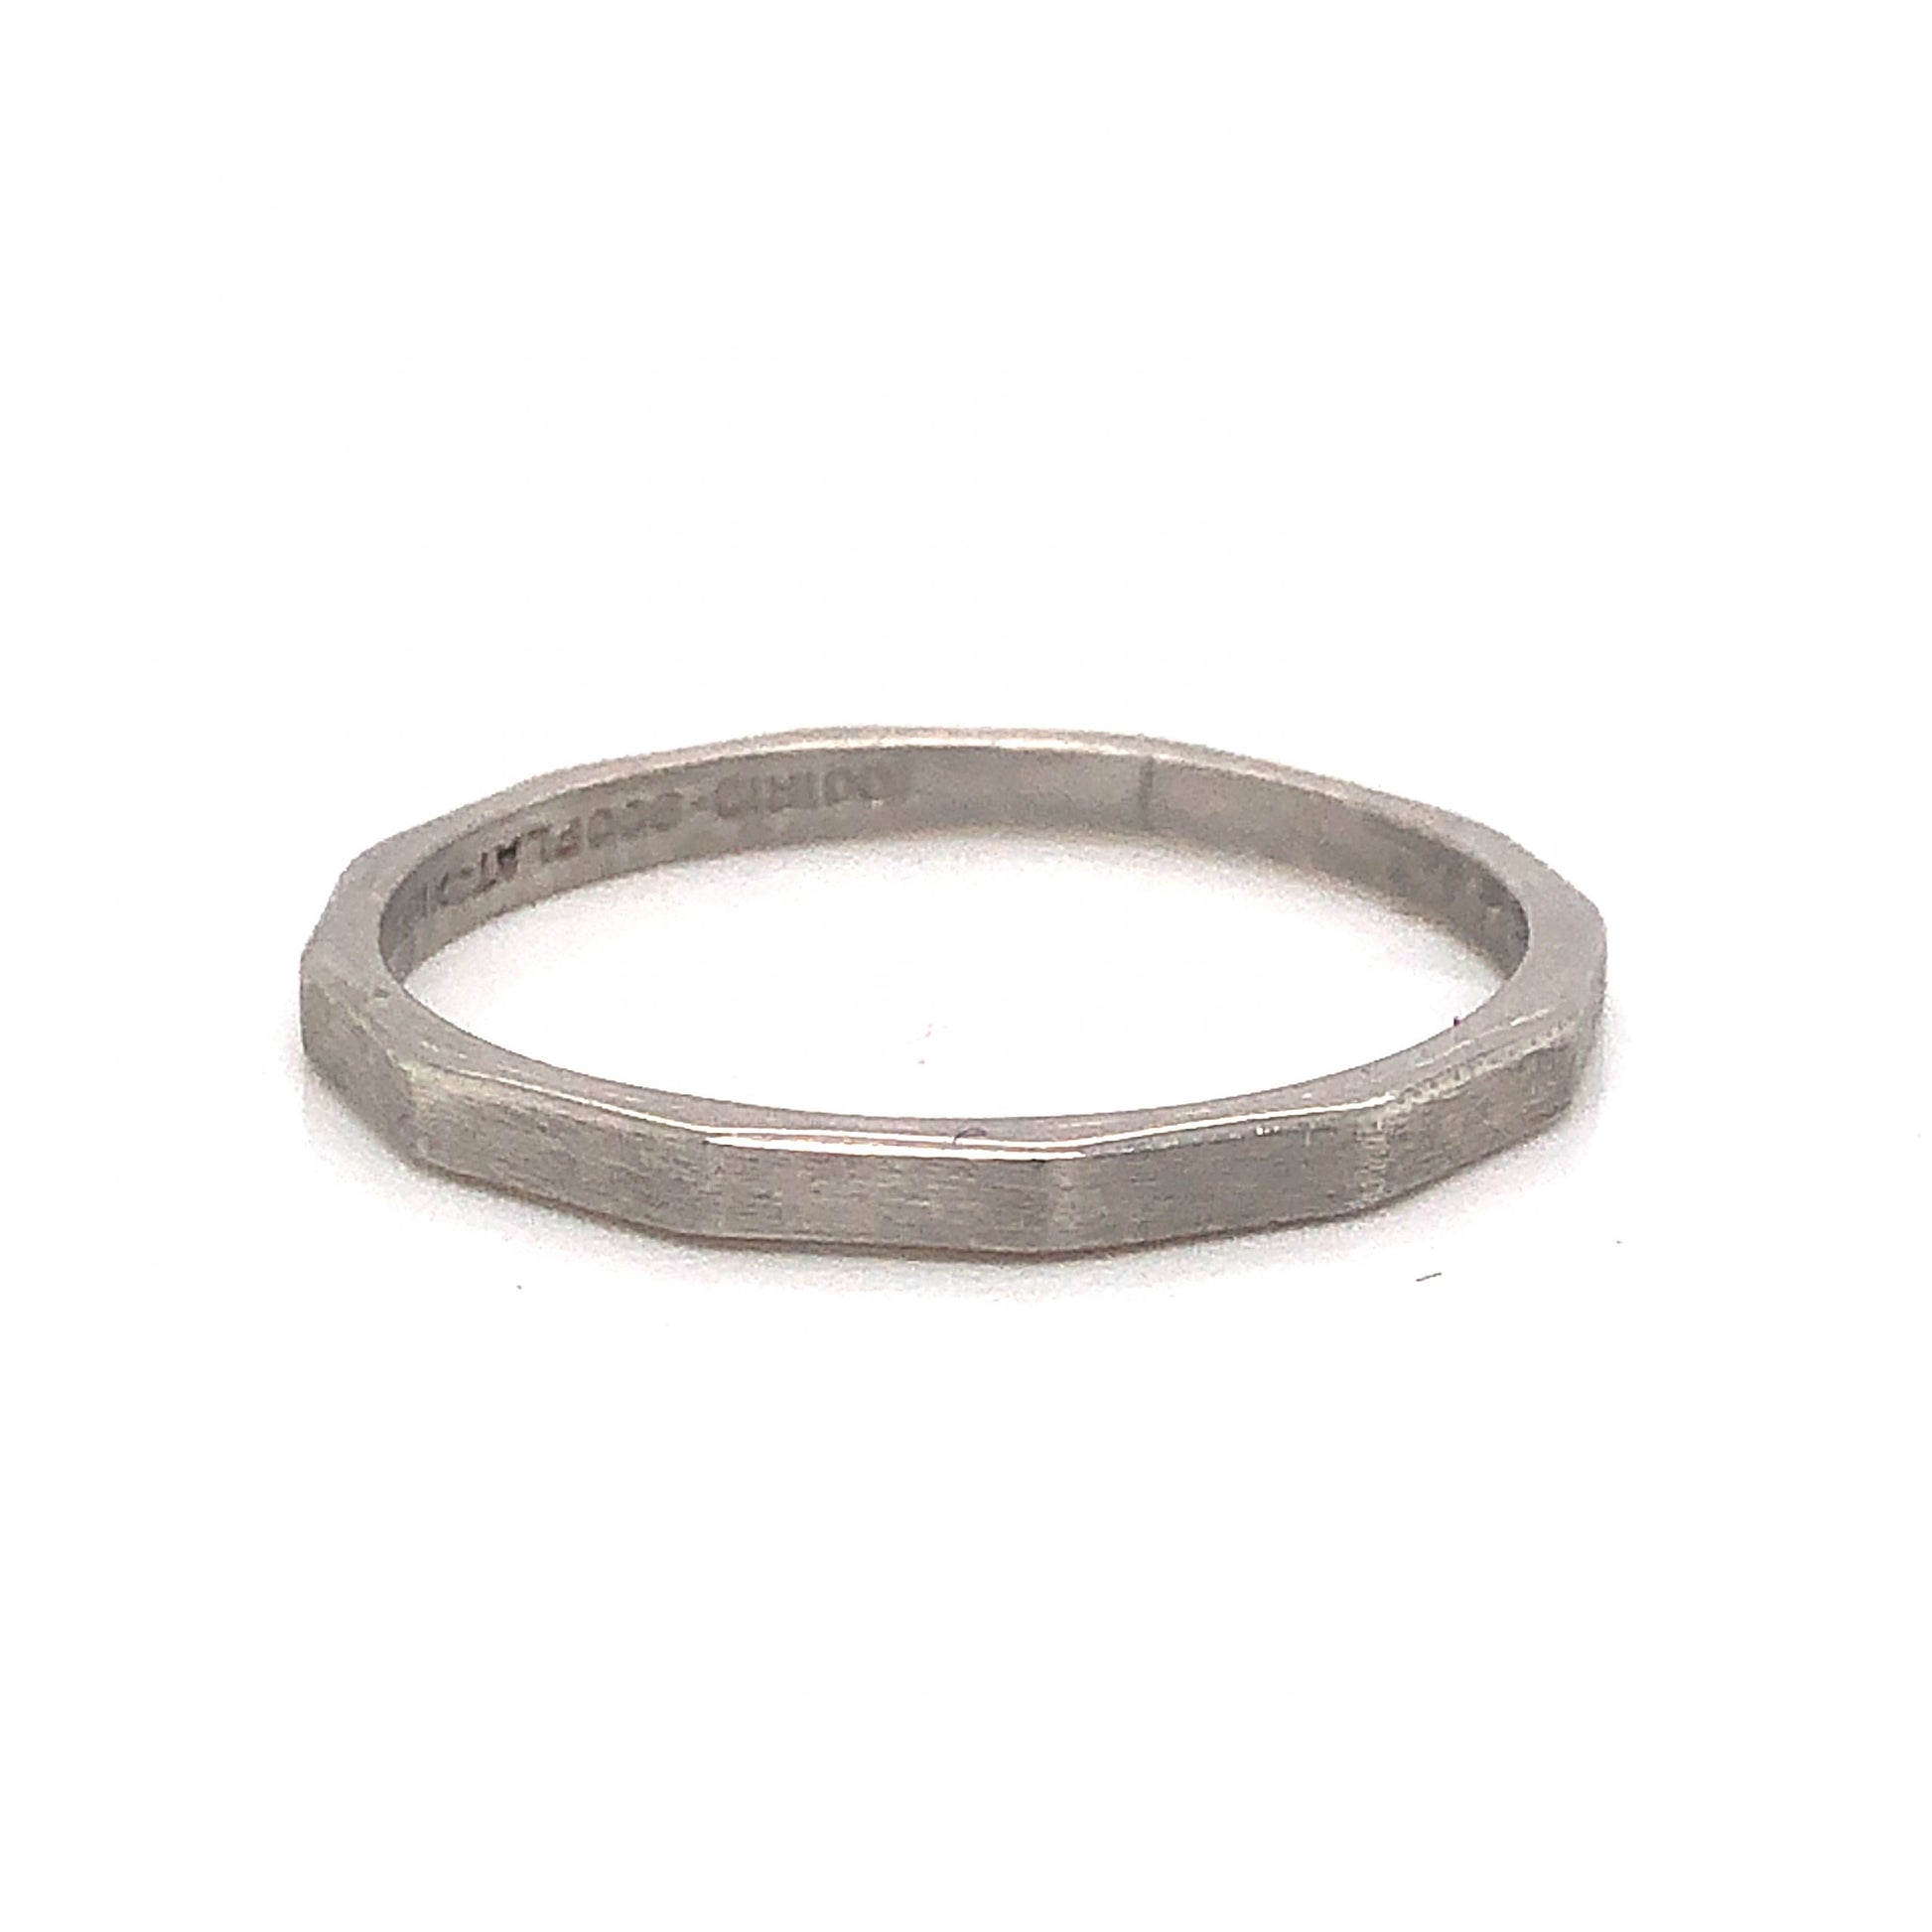 Vintage Tiffany & Co. Geometric Wedding Band in PlatinumComposition: PlatinumRing Size: 9Total Gram Weight: 3.1 gInscription: 100 IRID 900 PLAT,  E. G. and C. L. June 14th 1950